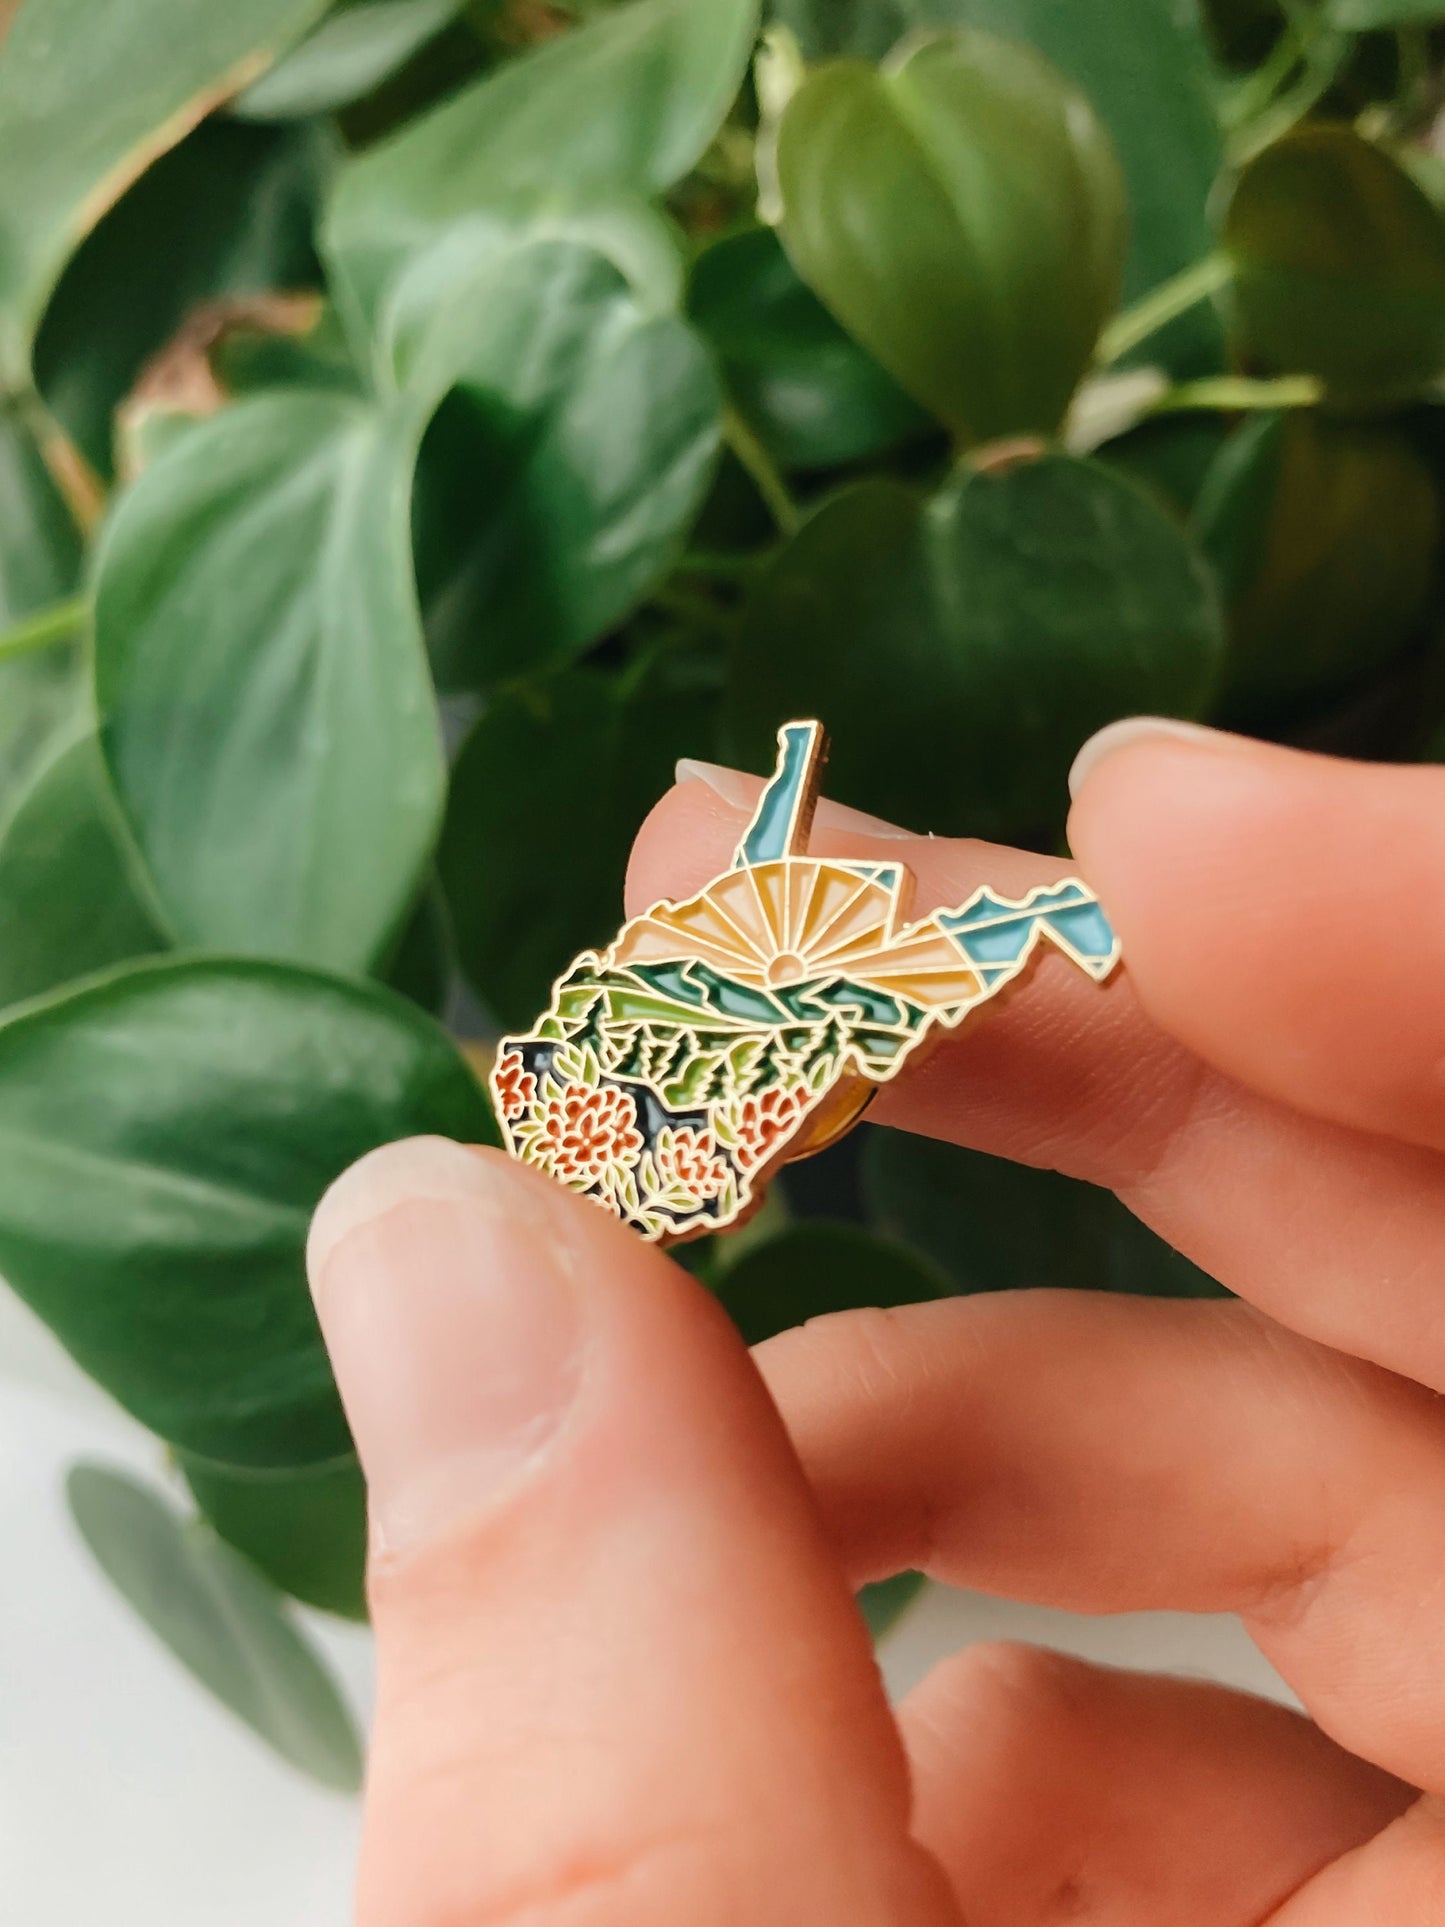 West Virginia Enamel Pin | Gold Soft Enamel Pin | Illustrated United States Pin | Butterfly Clasp | 1.25"